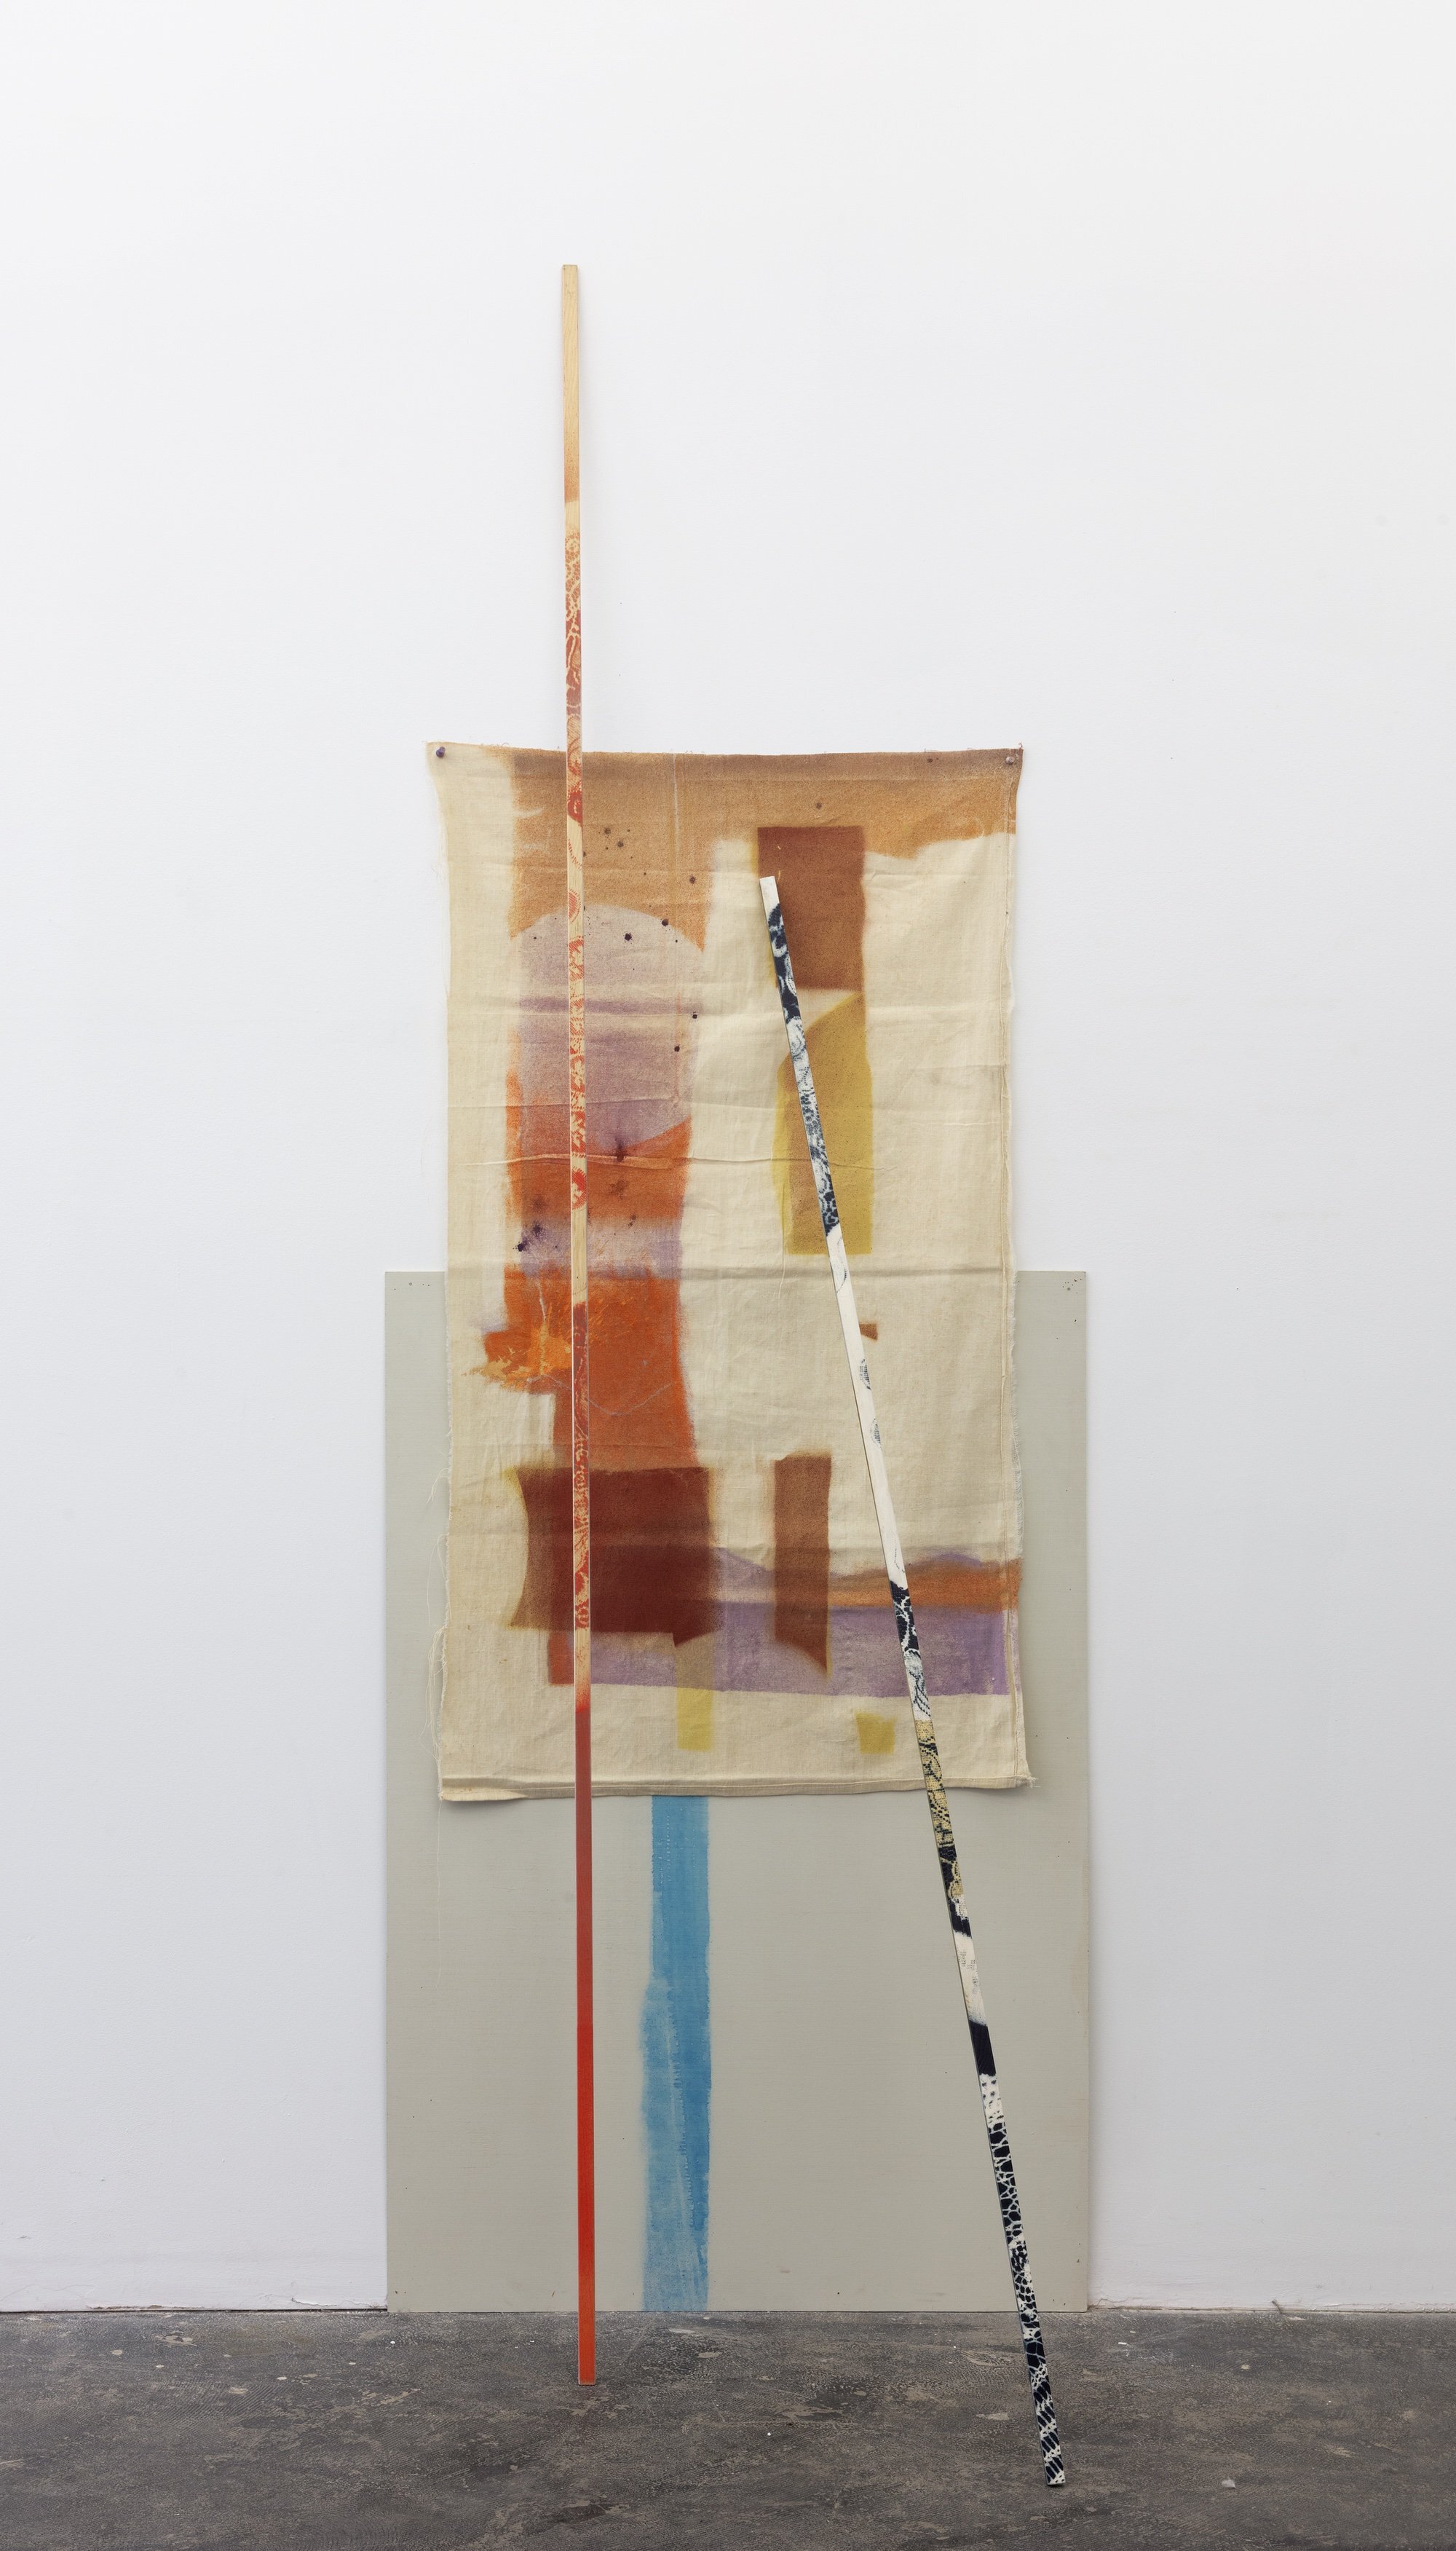  Cybele Lyle  Desert Walls 02b , 2021 Wood panel, acrylic paint, wood, fabric 73 x 34 inches + variable 